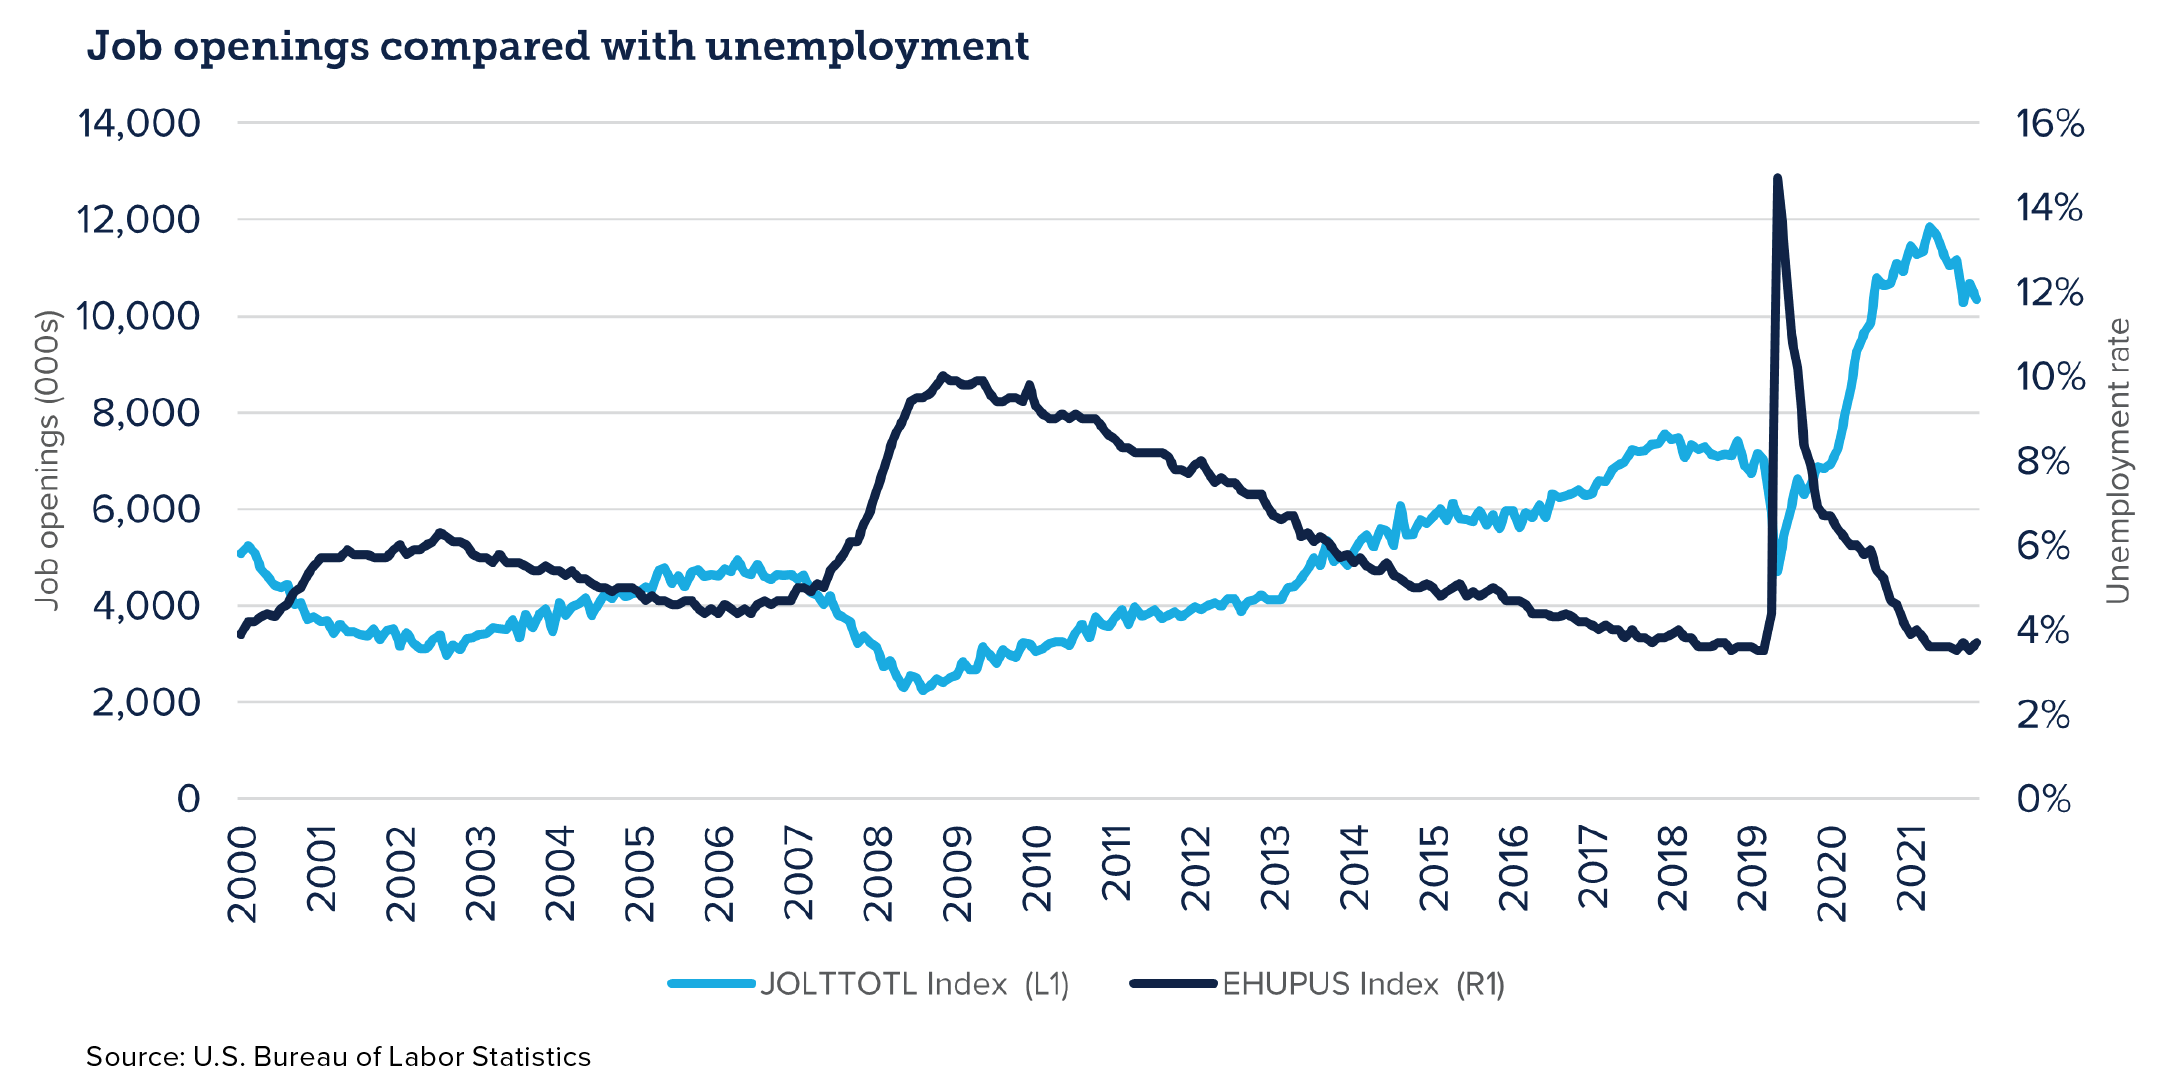 Chart showing job openings compared with unemployment